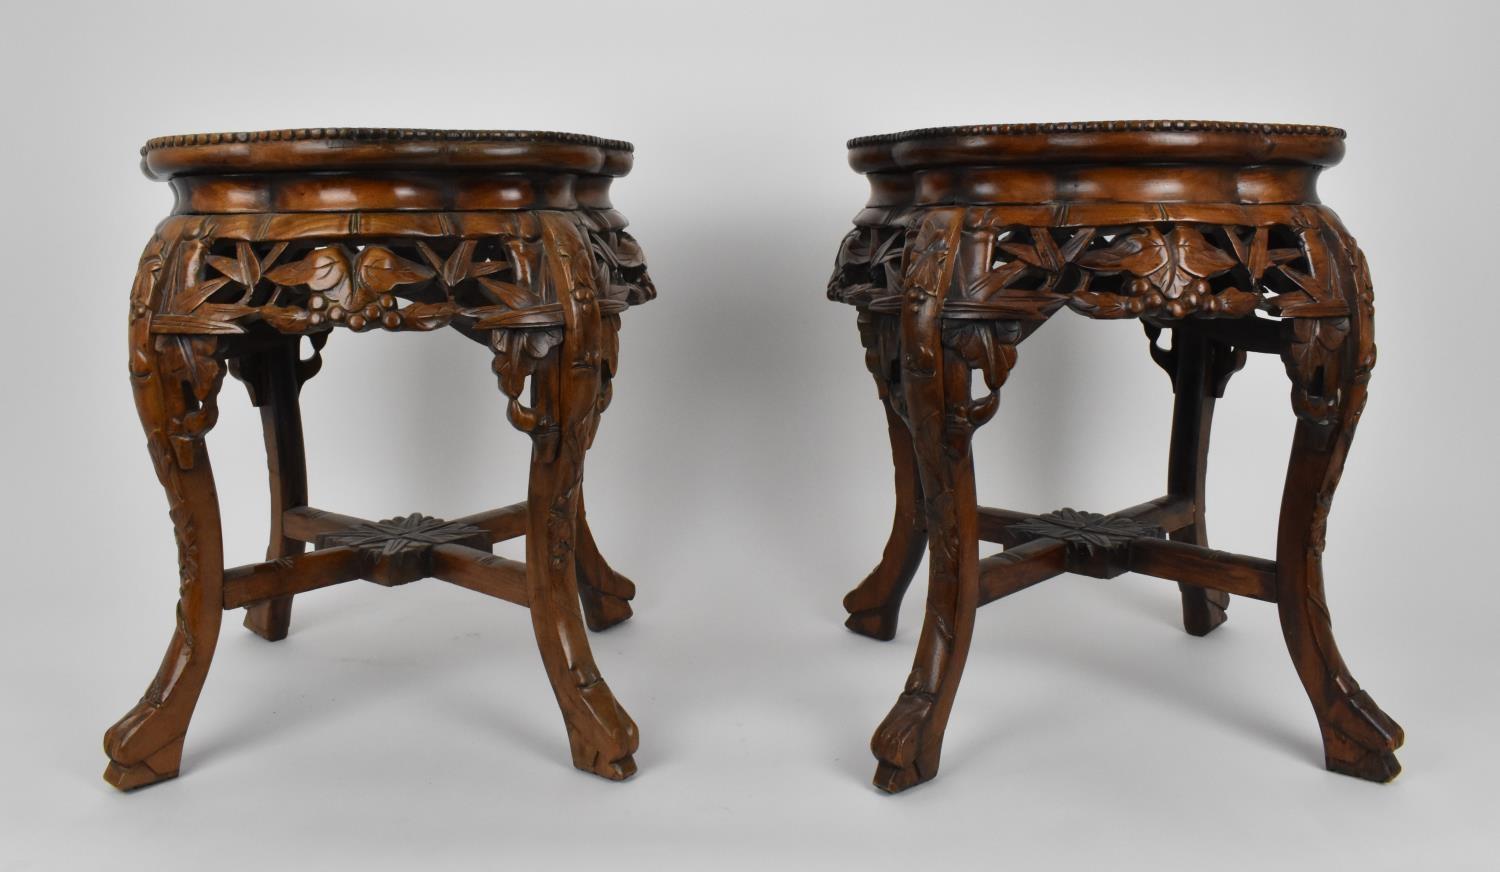 A pair of Chinese carved hardwood and marble jardiniere stands, with beaded rim and pierced